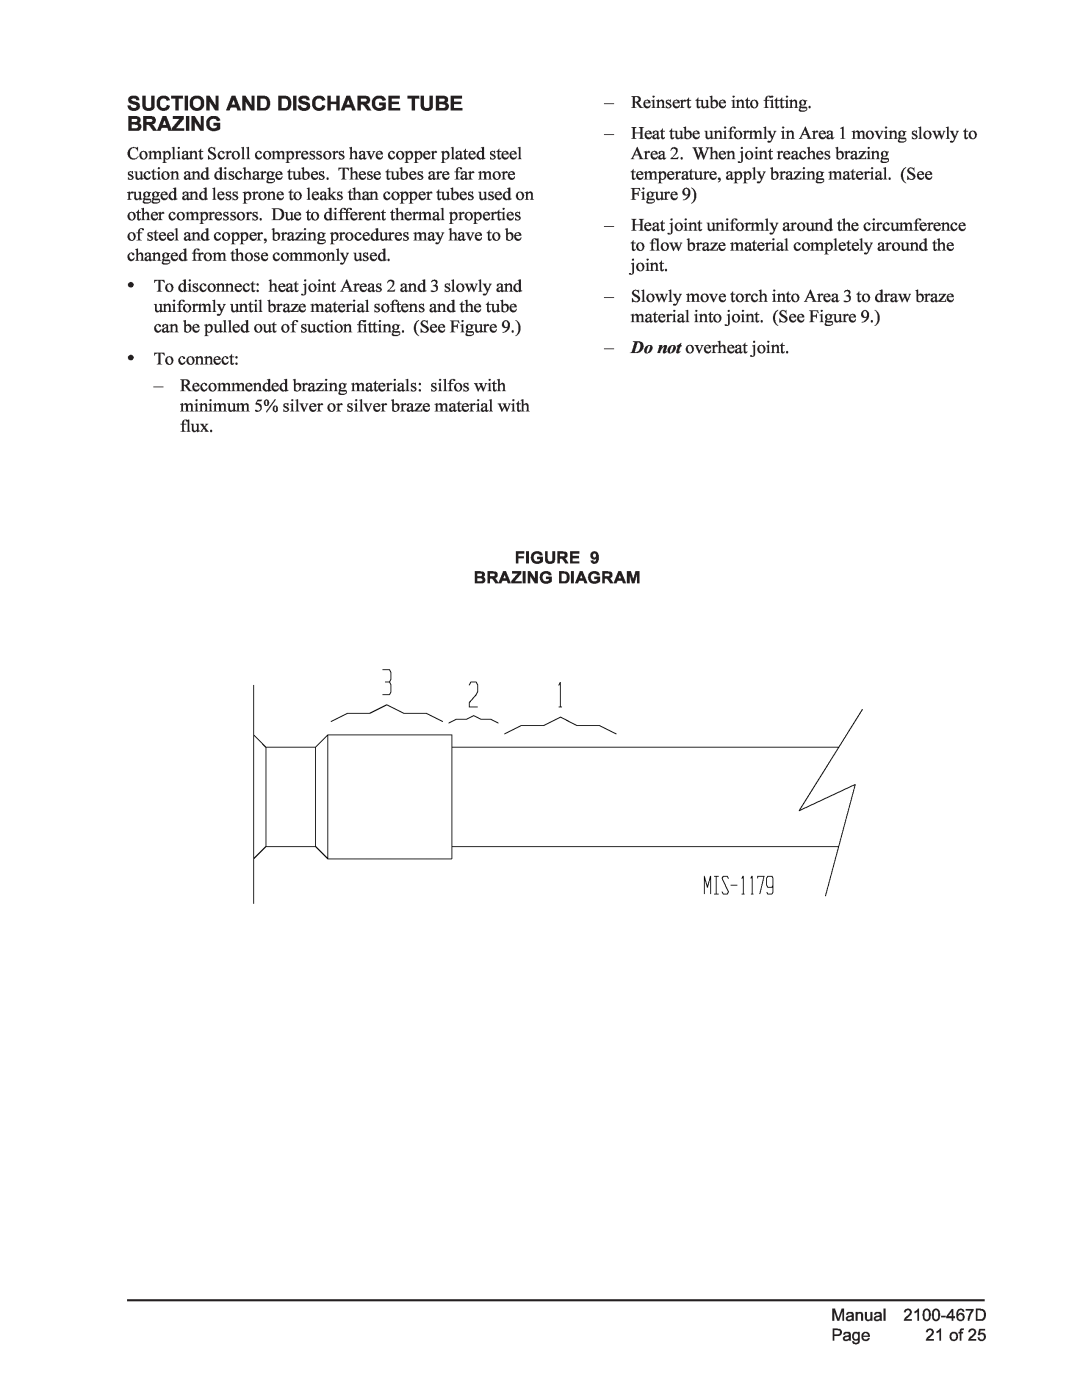 Bard PA13241-A, PA13361-A Suction And Discharge Tube Brazing, Figure Brazing Diagram, Manual, 2100-467D, Page, 21 of 